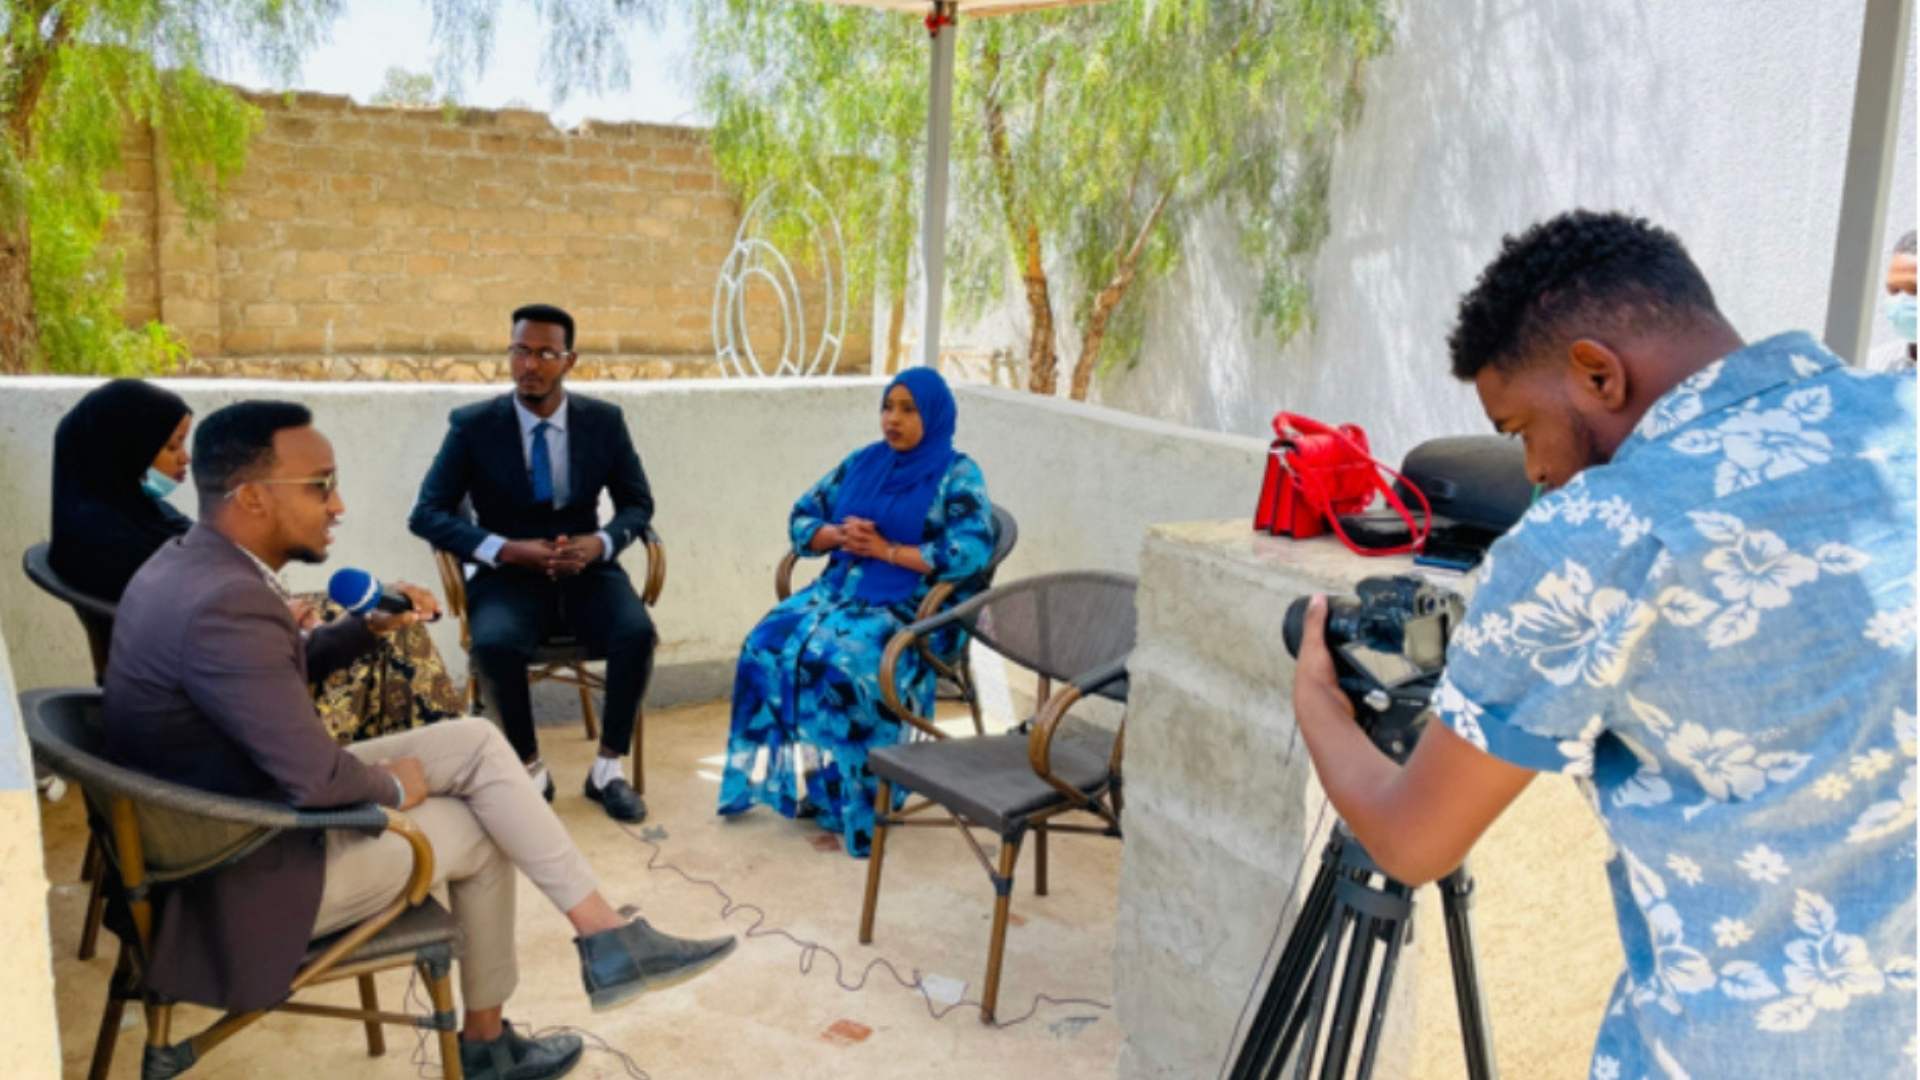 You are currently viewing GOOBJOOG SOMALI TV Invite Journalists to Talk about how they are Key Influencers in Fighting to End FGM, Somalian region, Ethiopia 